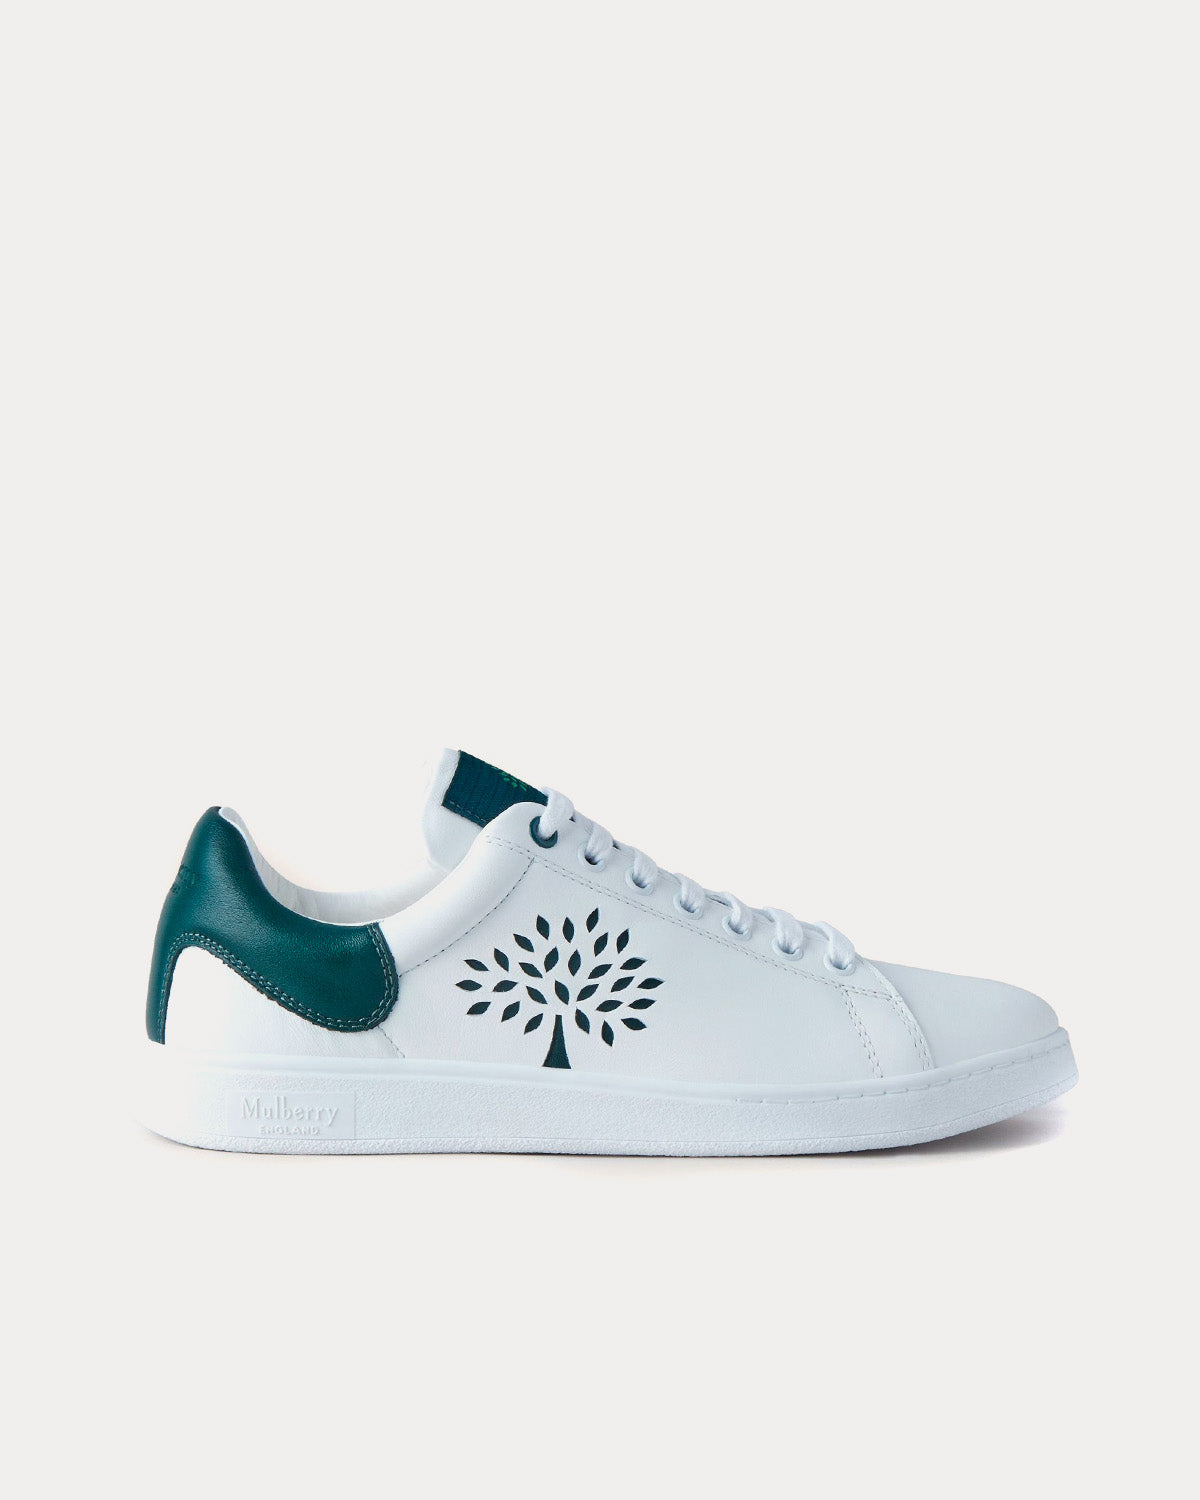 Mulberry - Tree Tennis Bovine Leather Military Green Low Top Sneakers